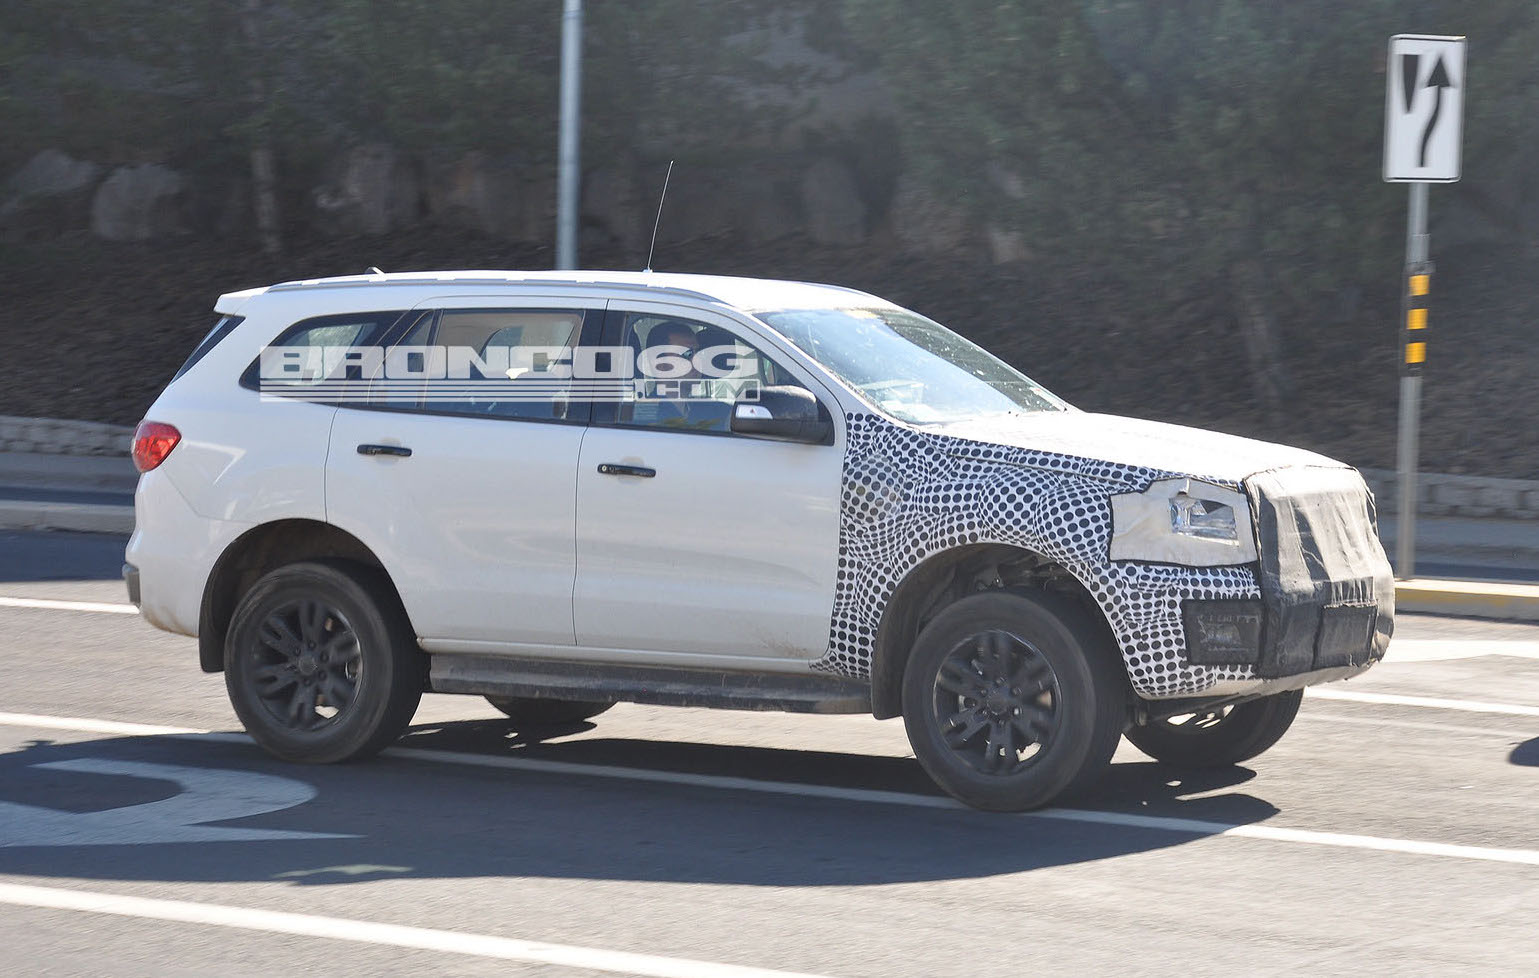 2020 Ford Bronco prototype spotted with Everest body